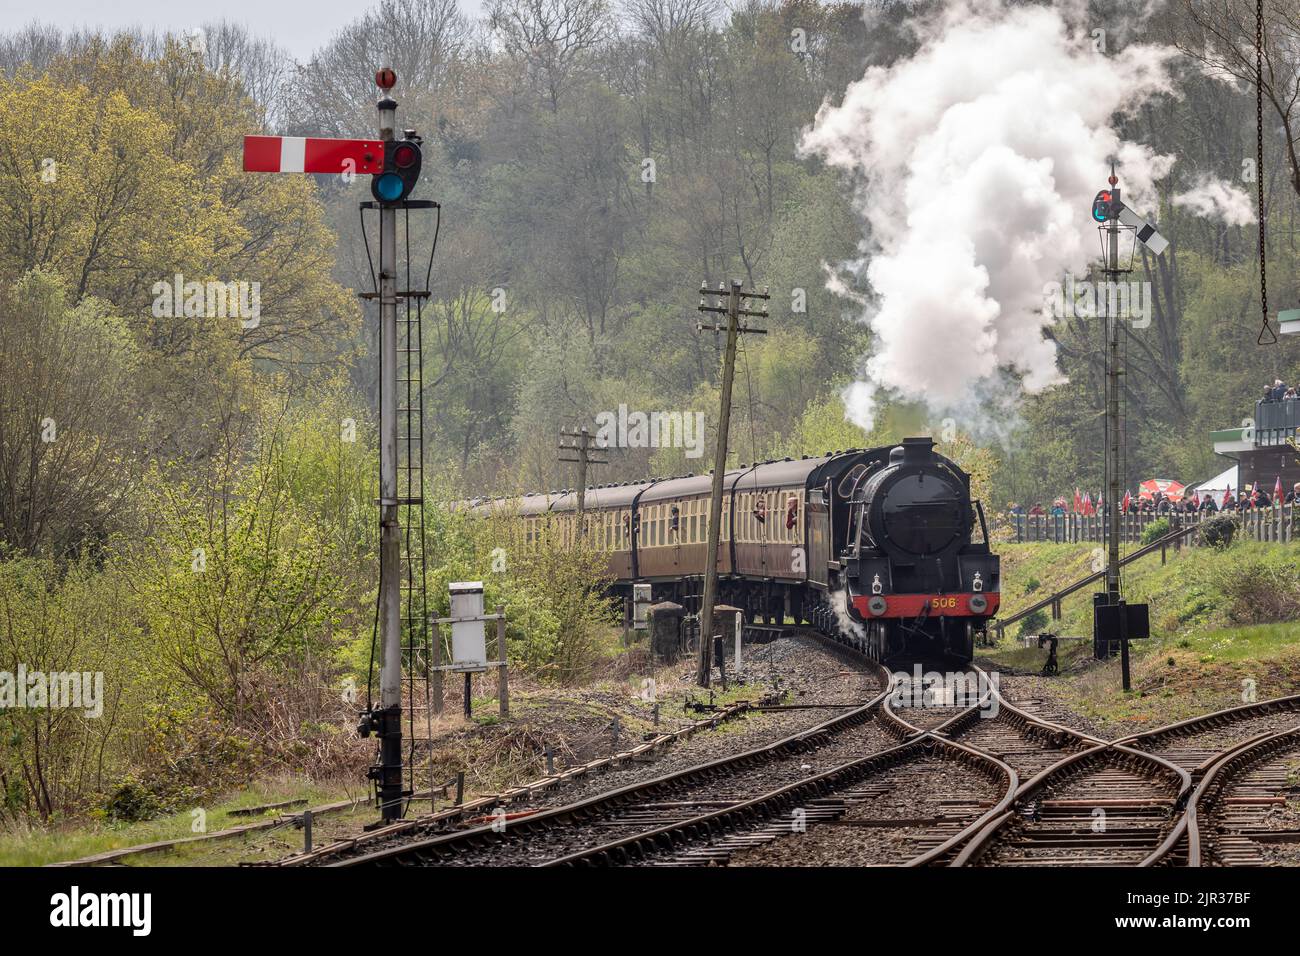 SR 'S15' 4-6-0 No. 506 arrives at Highley station on the Severn Valley Railway, Worcestershire Stock Photo